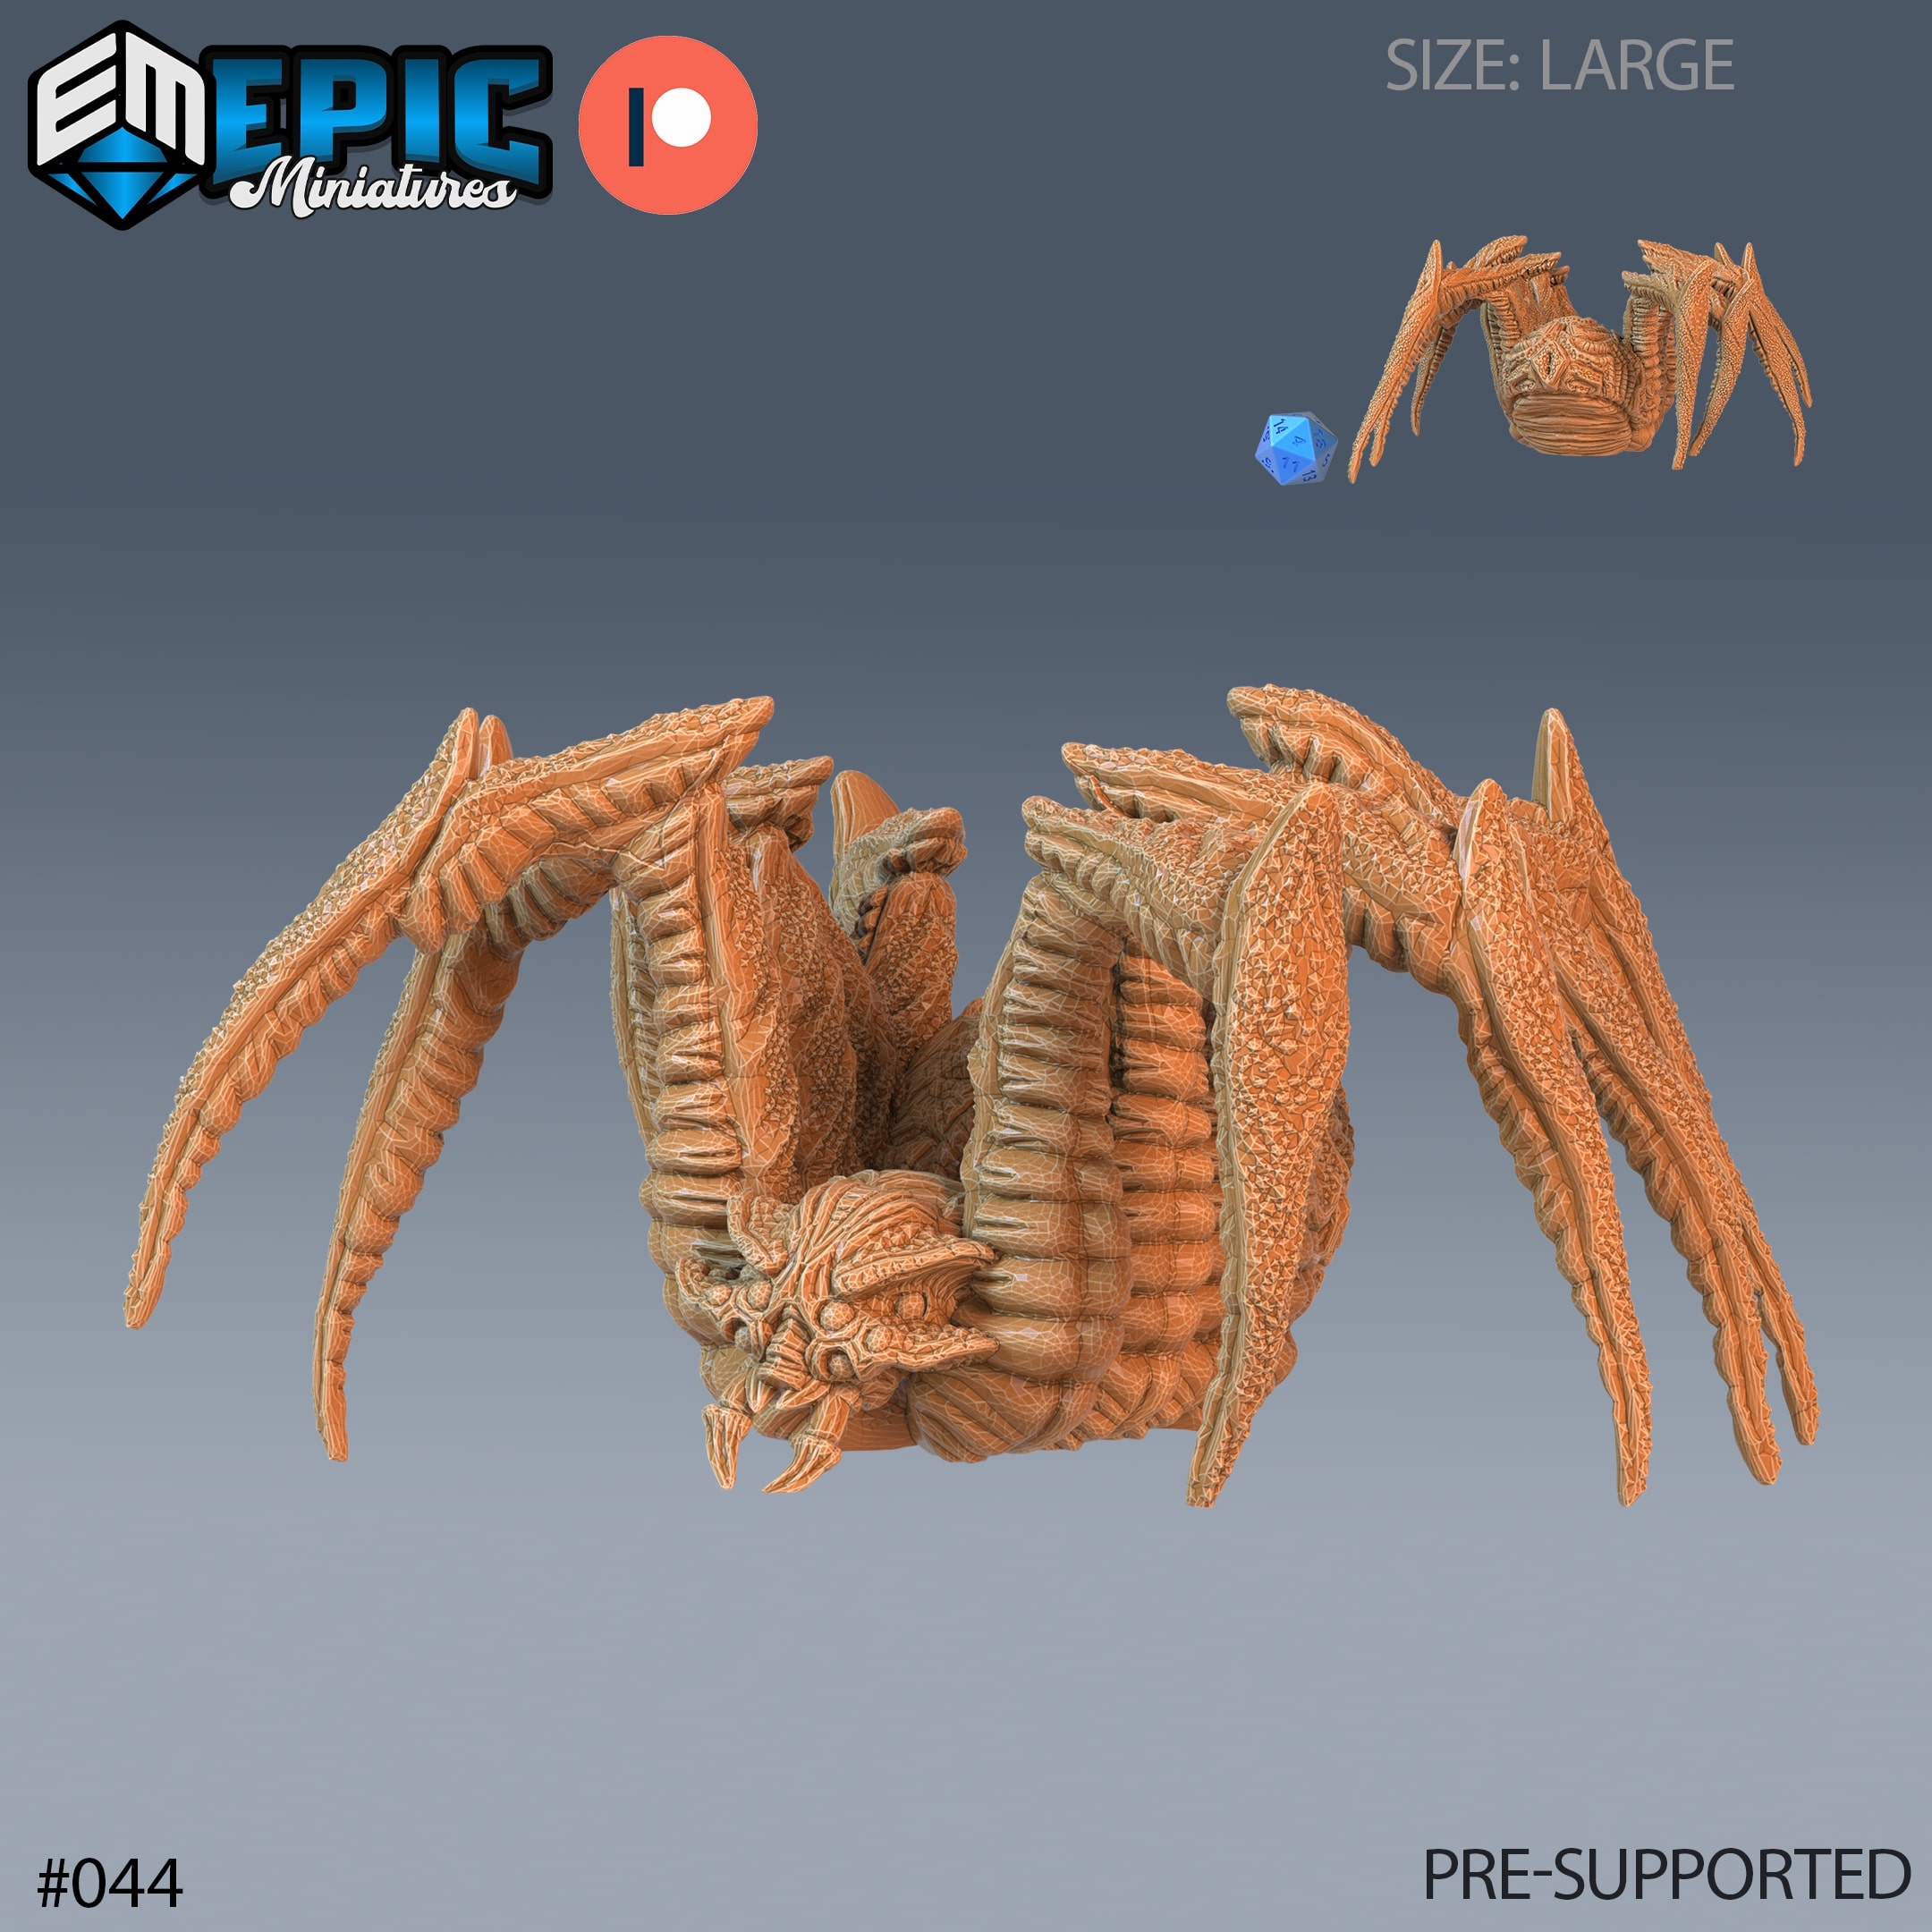 Giant Spider Collectible